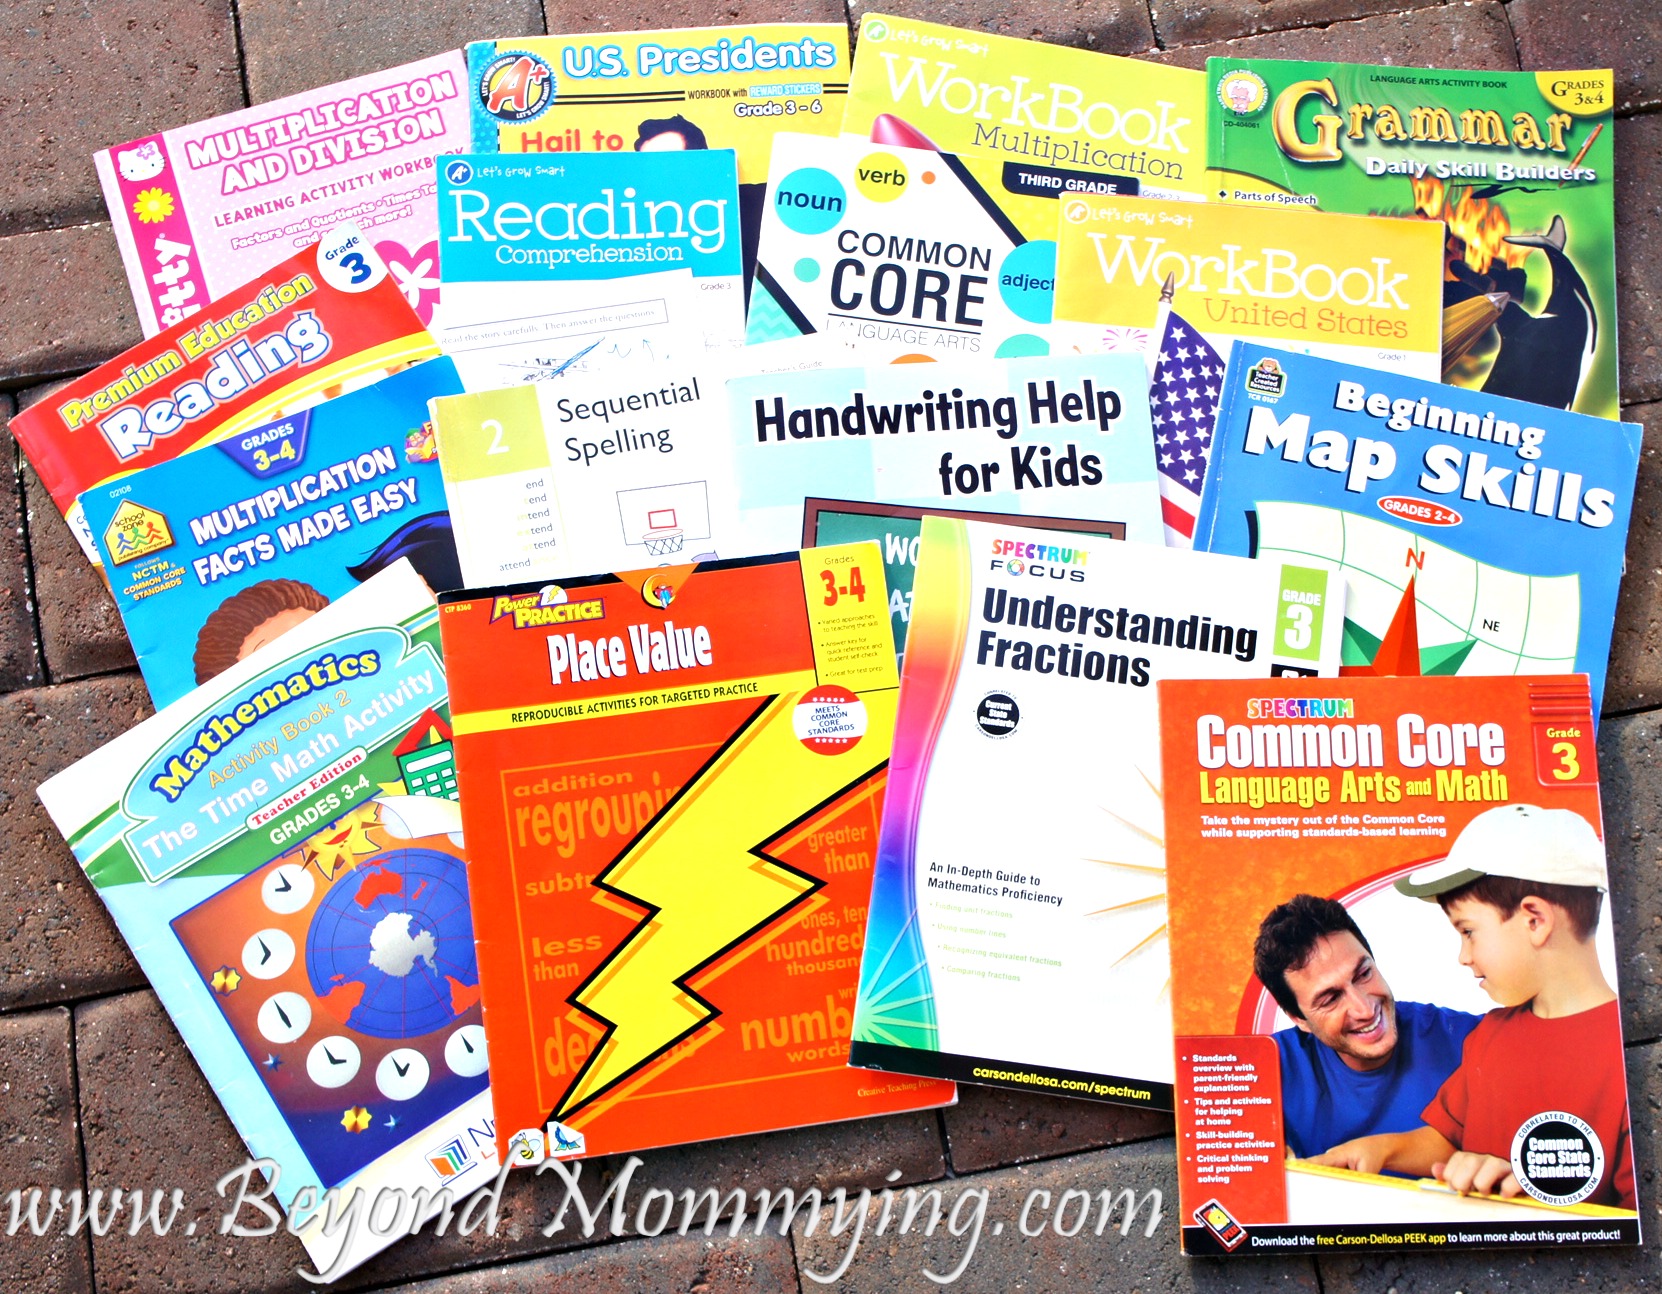 Complete curriculum for 3rd grade